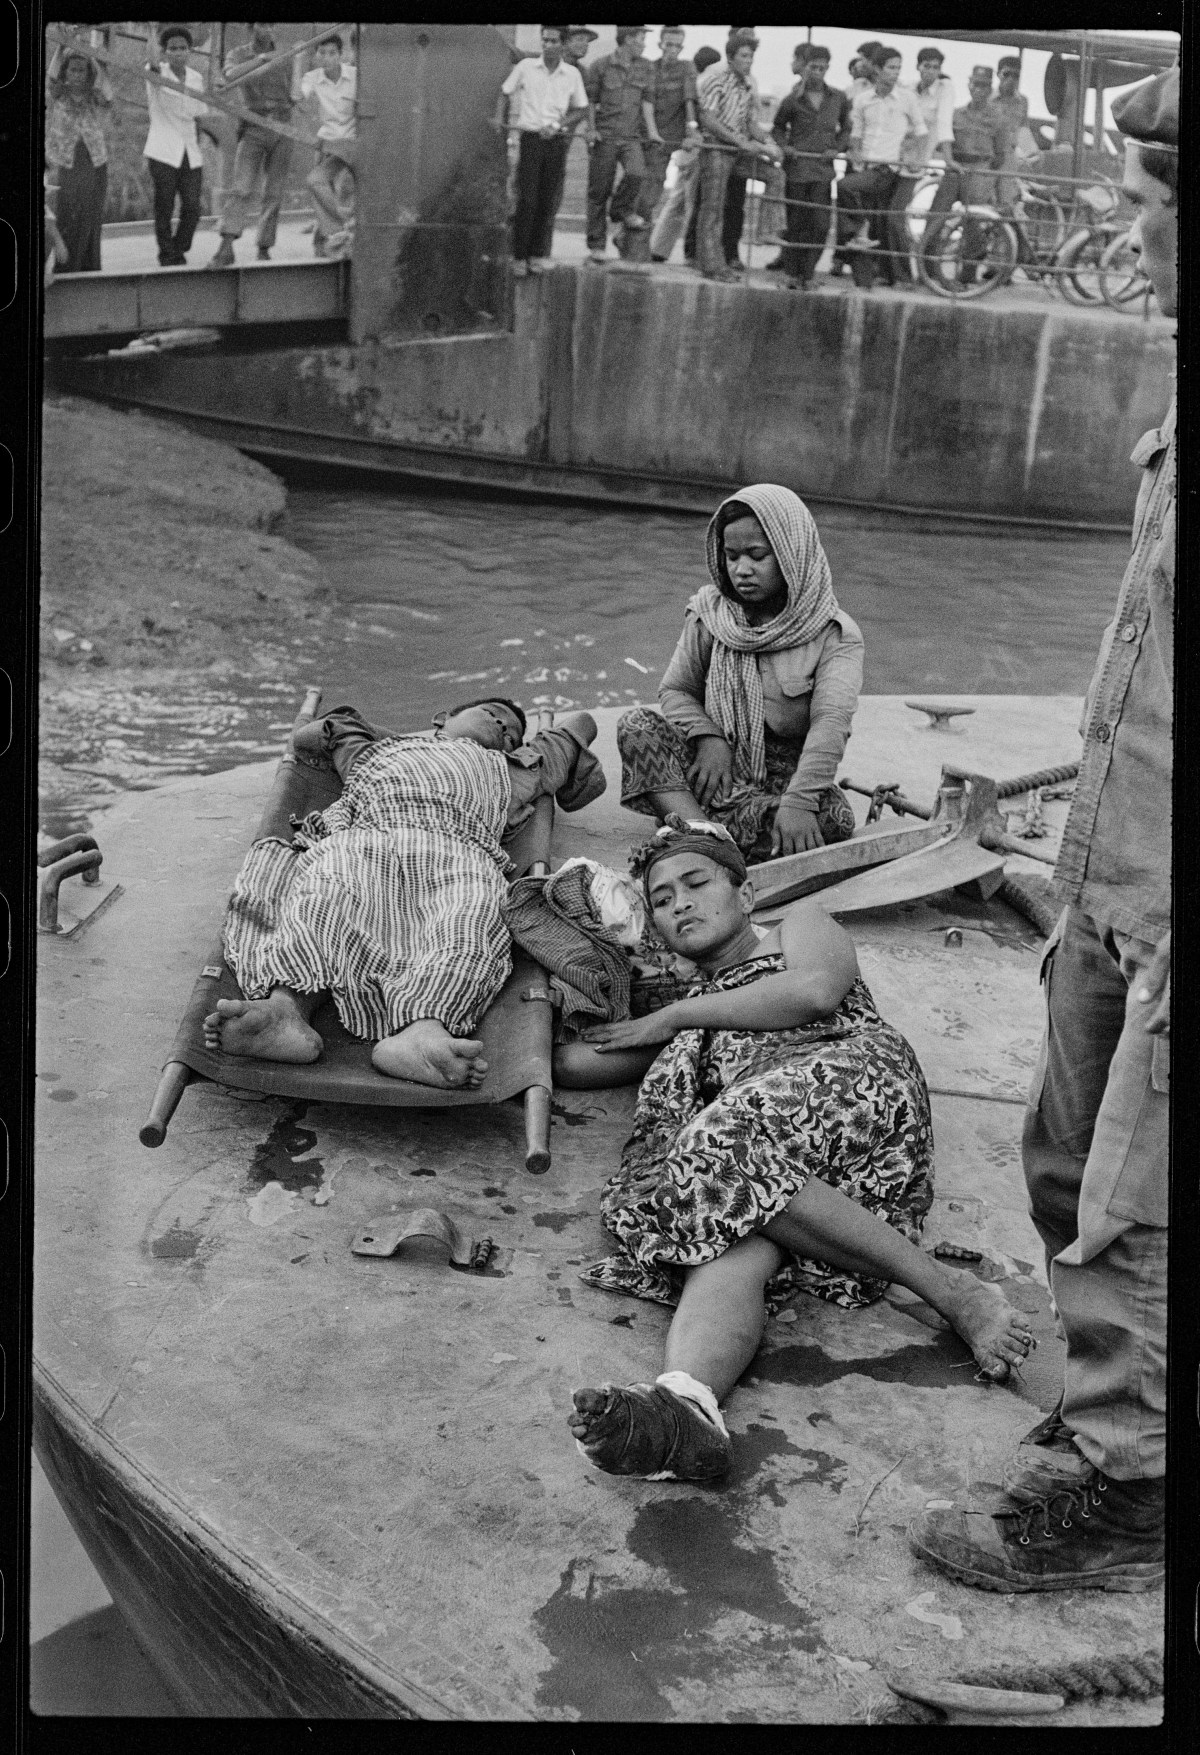 (Original Caption) Victims of U.S. Bombing Error. Phnom Penh: Cambodian civilians wounded in bombing error by U.S. warplanes at Neak Luong August 6, await transportation to hospital after having been brought here by Navy boats August 7. It's estimated some 300 civilian and military persons were killed or wounded in the attack.